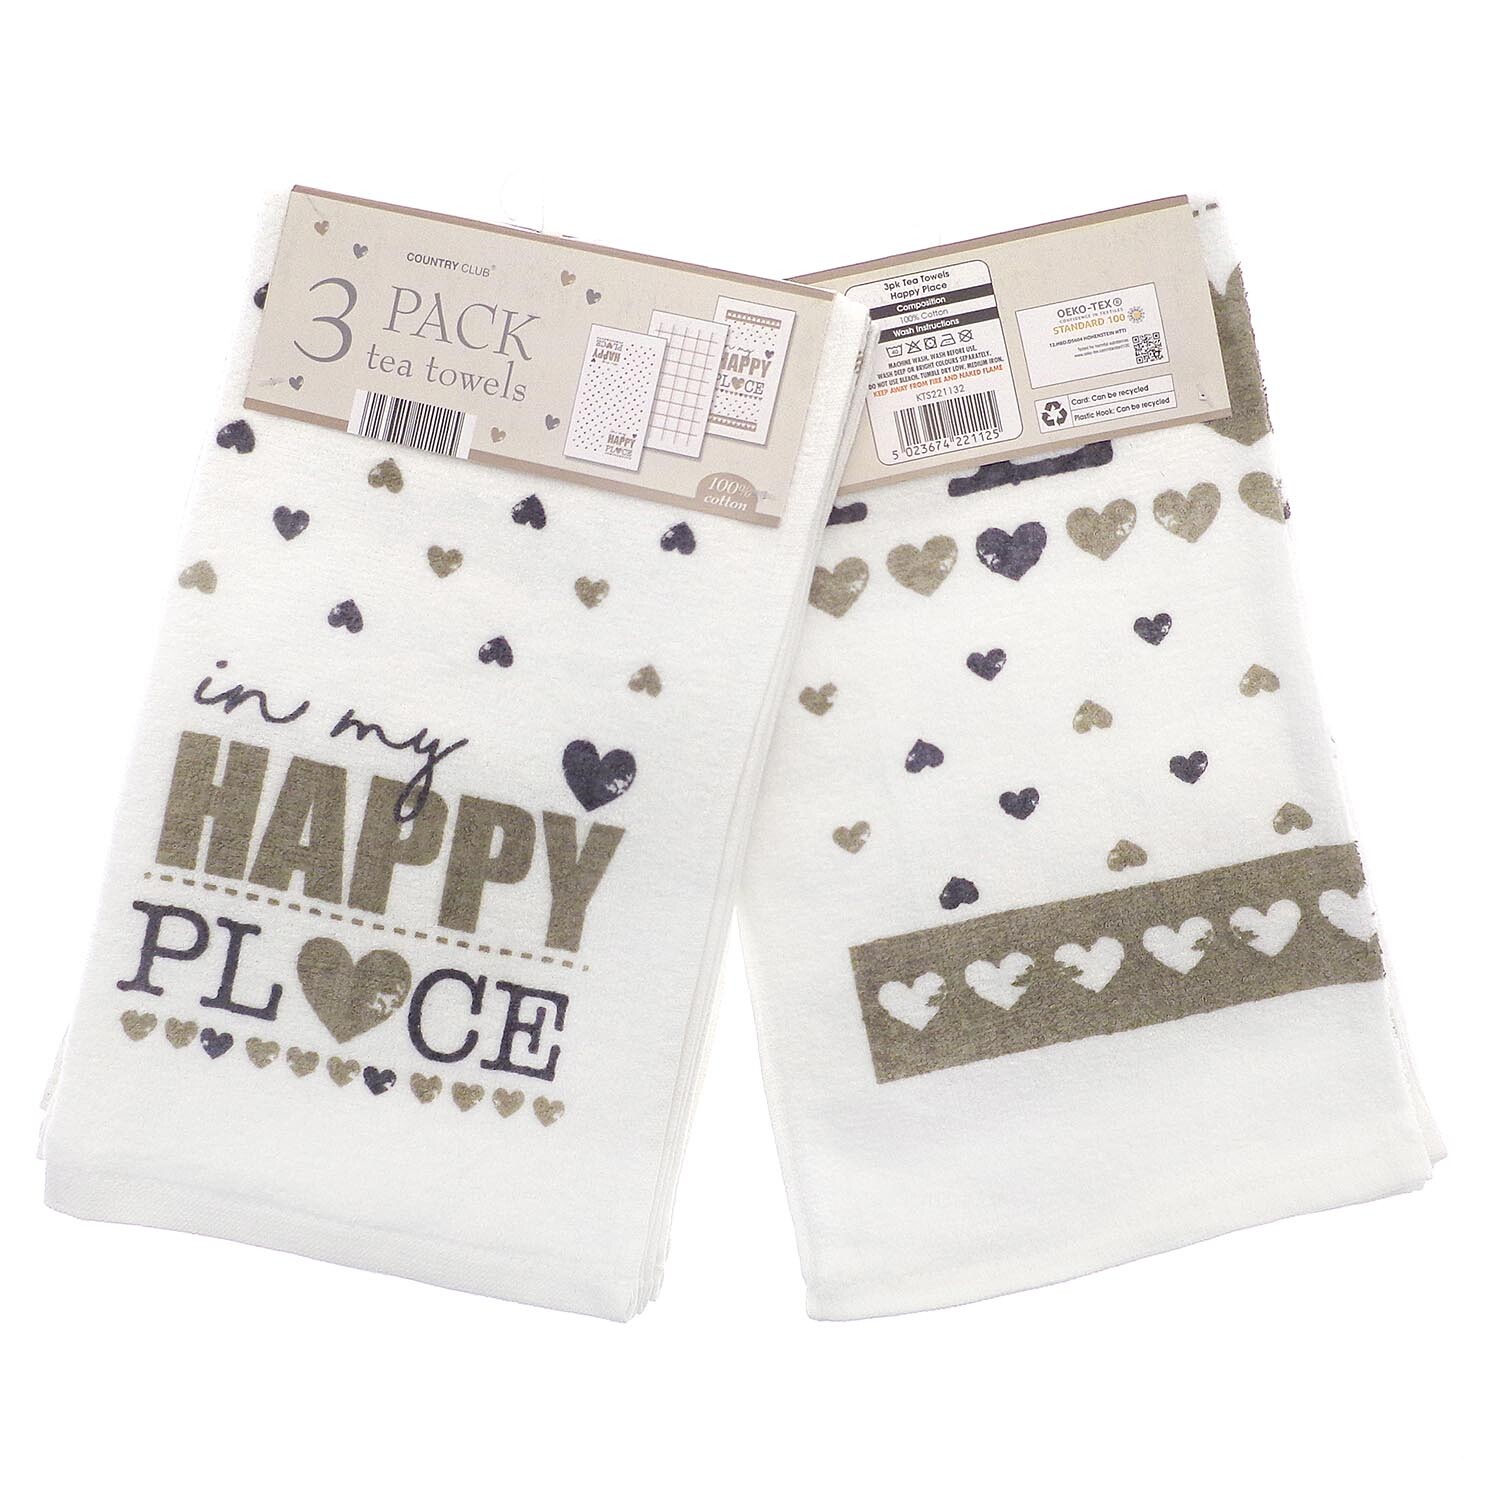 Pack of 3 Happy Place Tea Towels - White Image